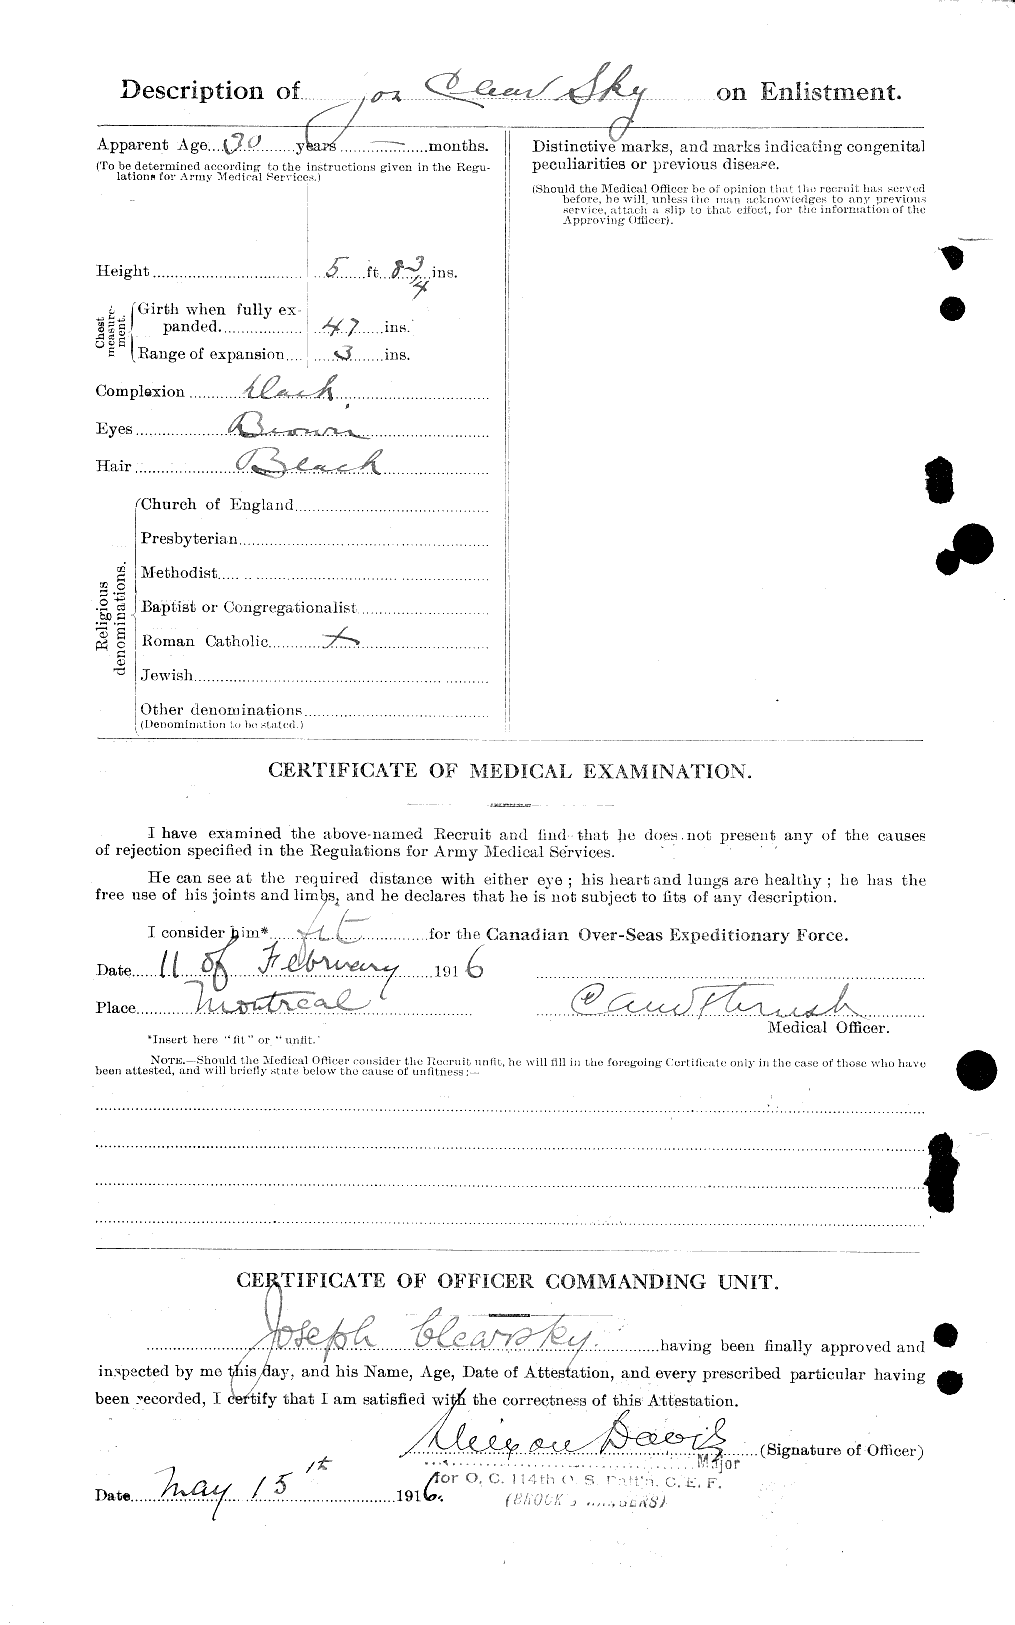 Personnel Records of the First World War - CEF 019329b